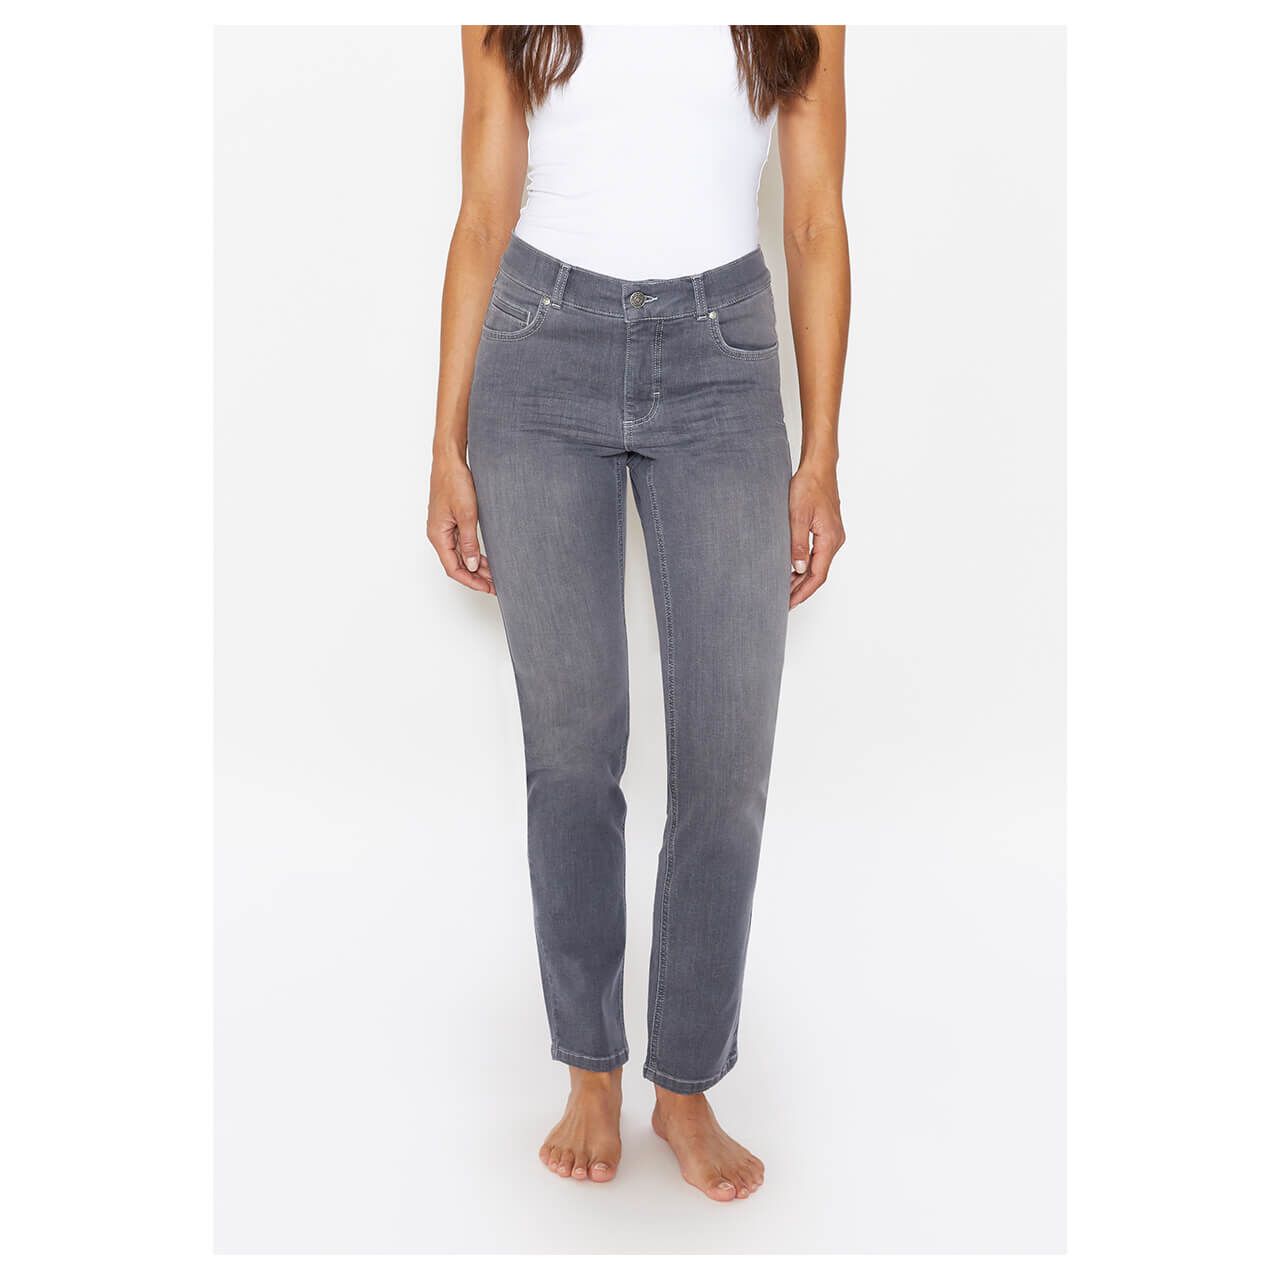 Angels Cici Jeans grey used buffi